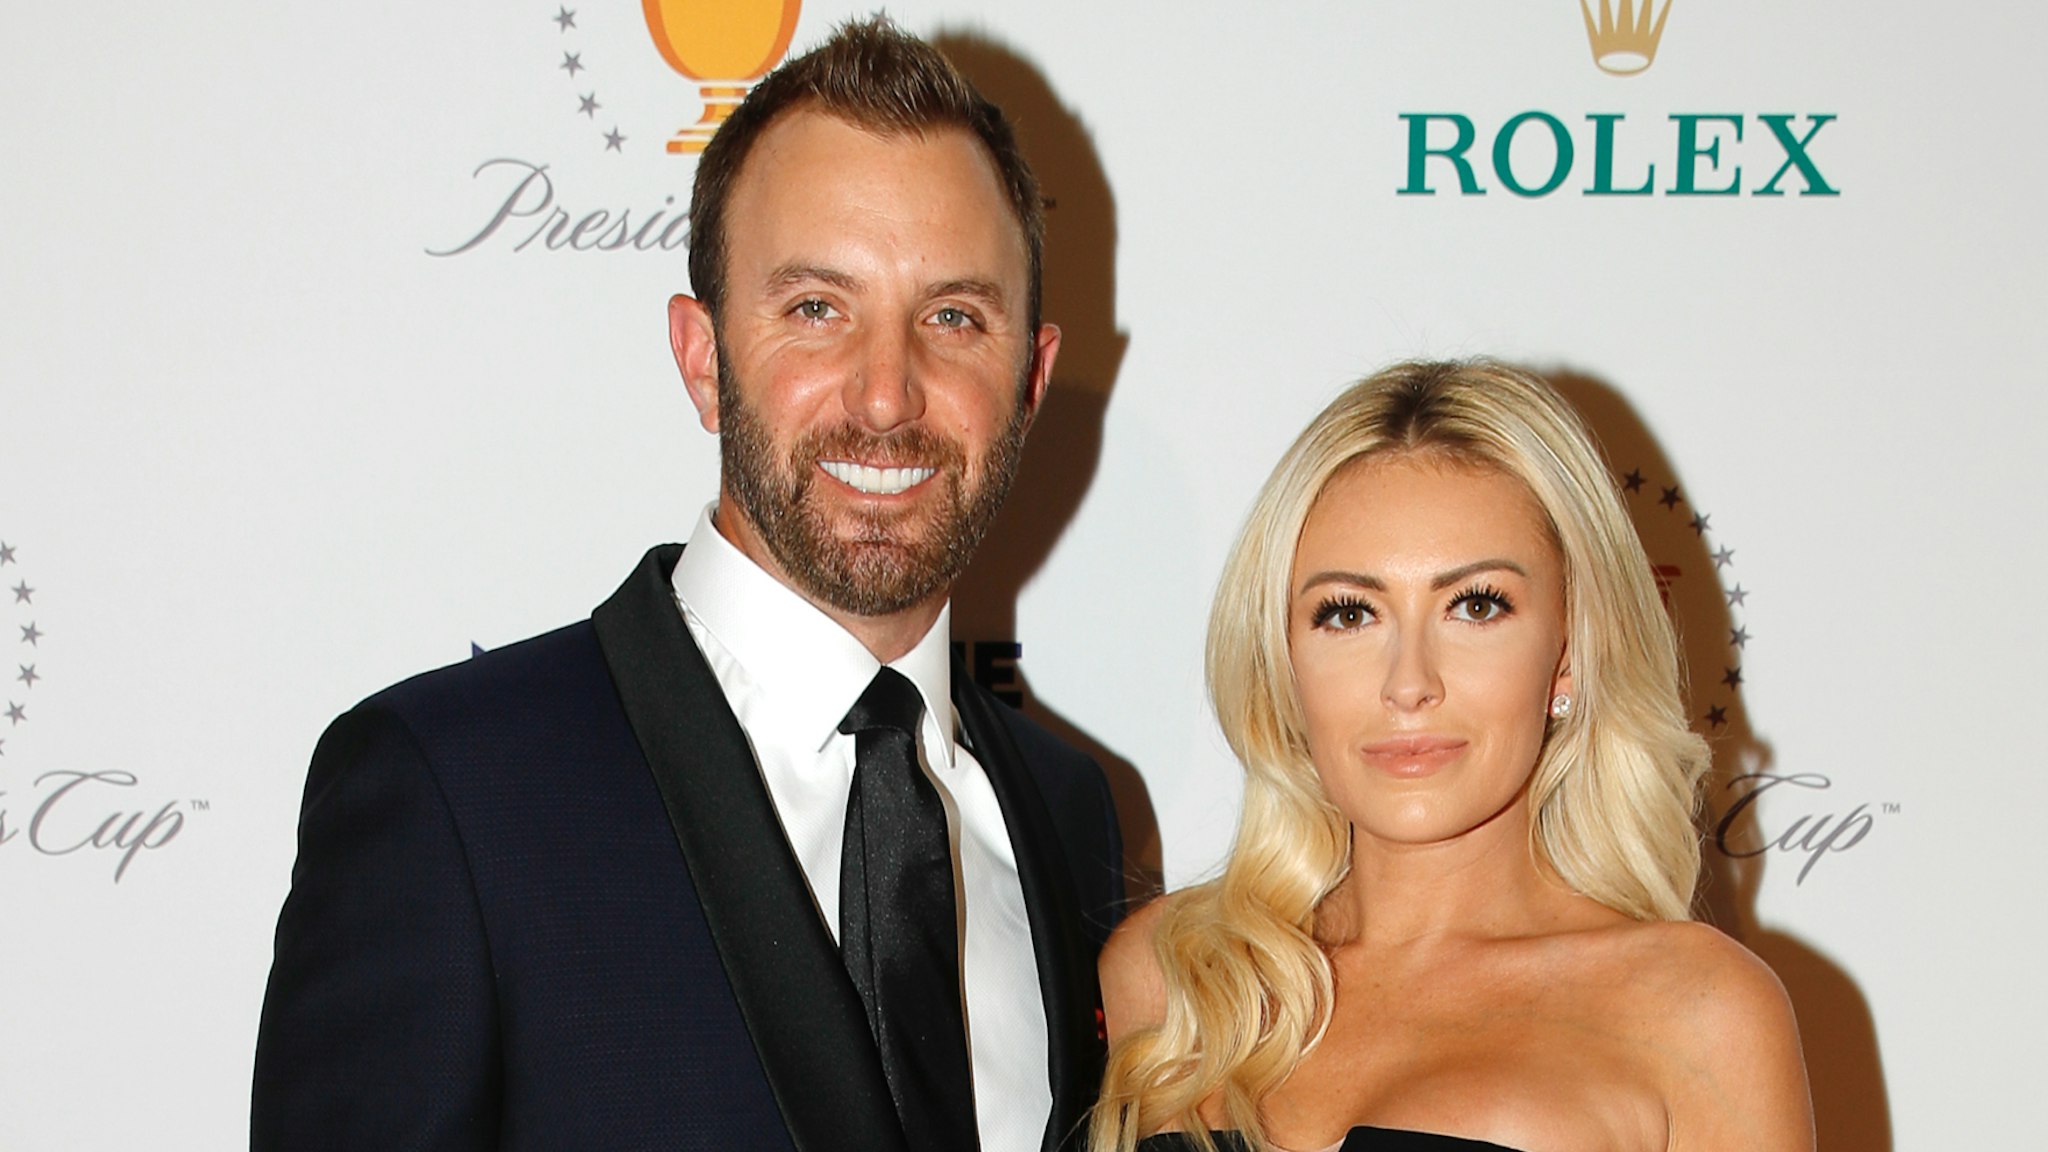 U.S. Team Dustin Johnson with his girlfriend Paulina Gretzky, pose on the red carpet at the Presidents Cup Gala at Crown Towers rior to Presidents Cup at The Royal Melbourne Golf Club on December 10, 2019, in Melbourne, Australia.